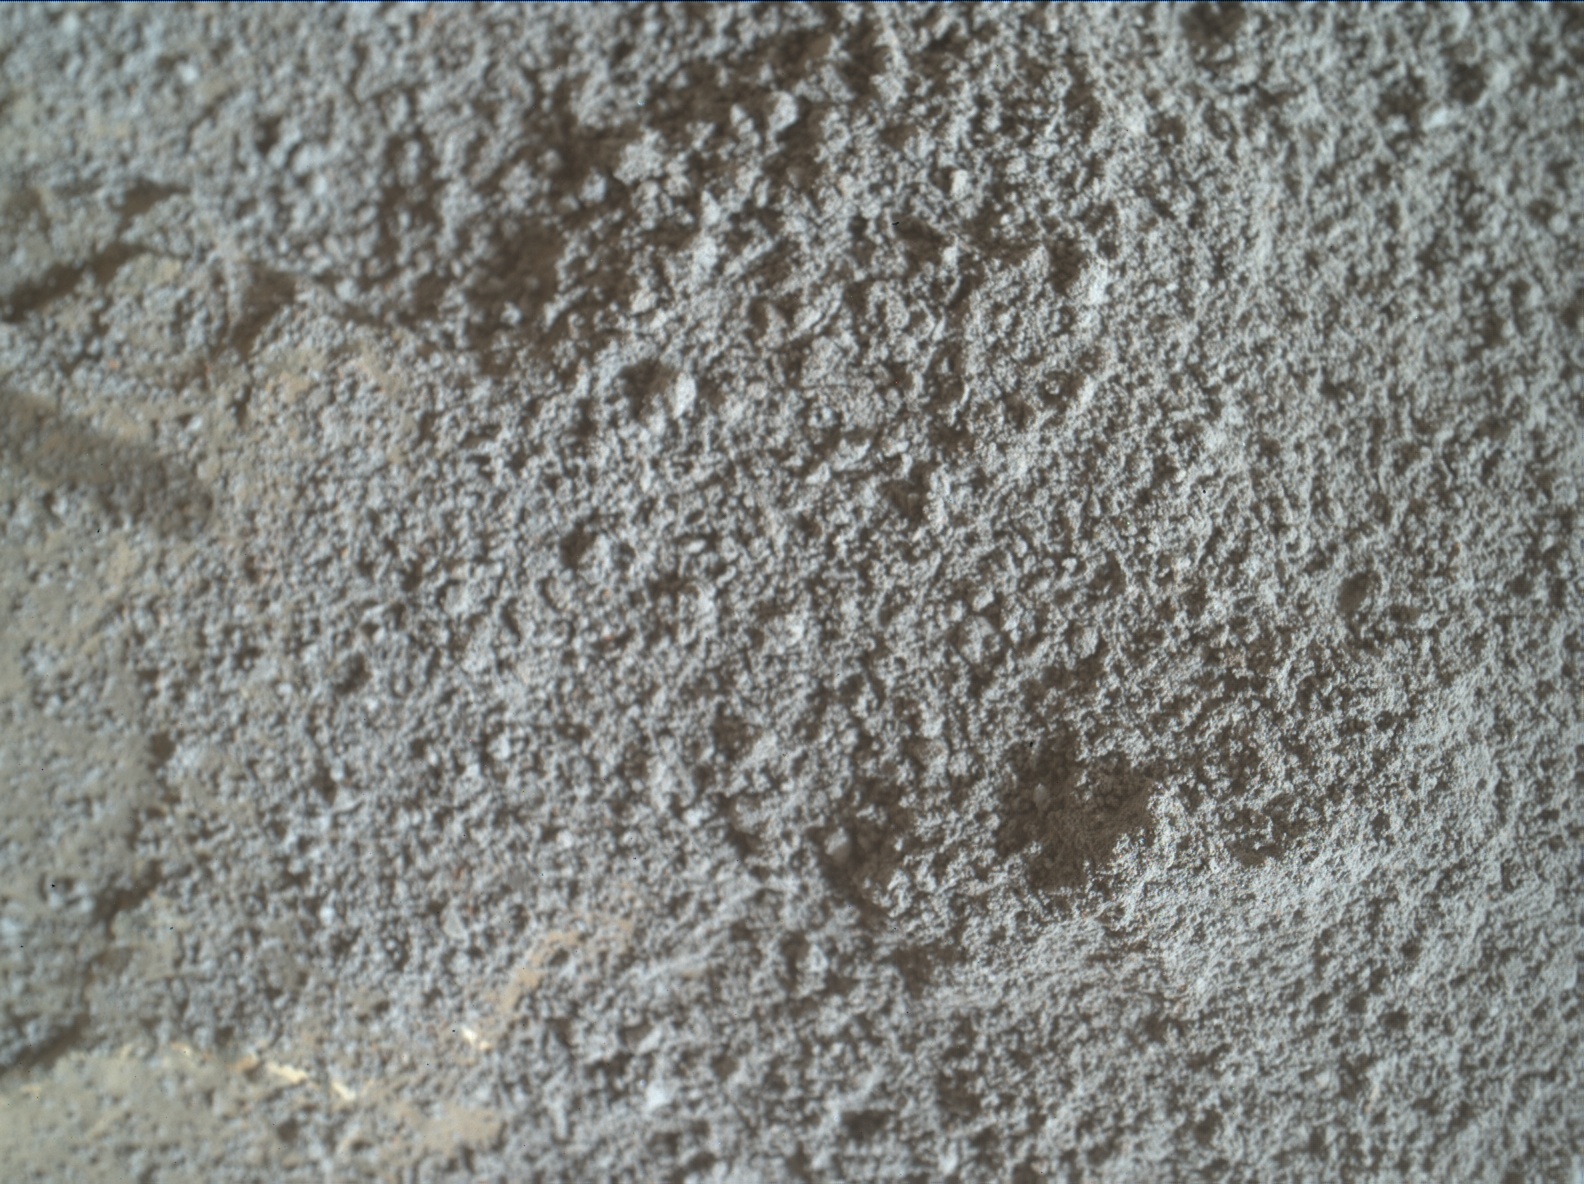 Nasa's Mars rover Curiosity acquired this image using its Mars Hand Lens Imager (MAHLI) on Sol 2245